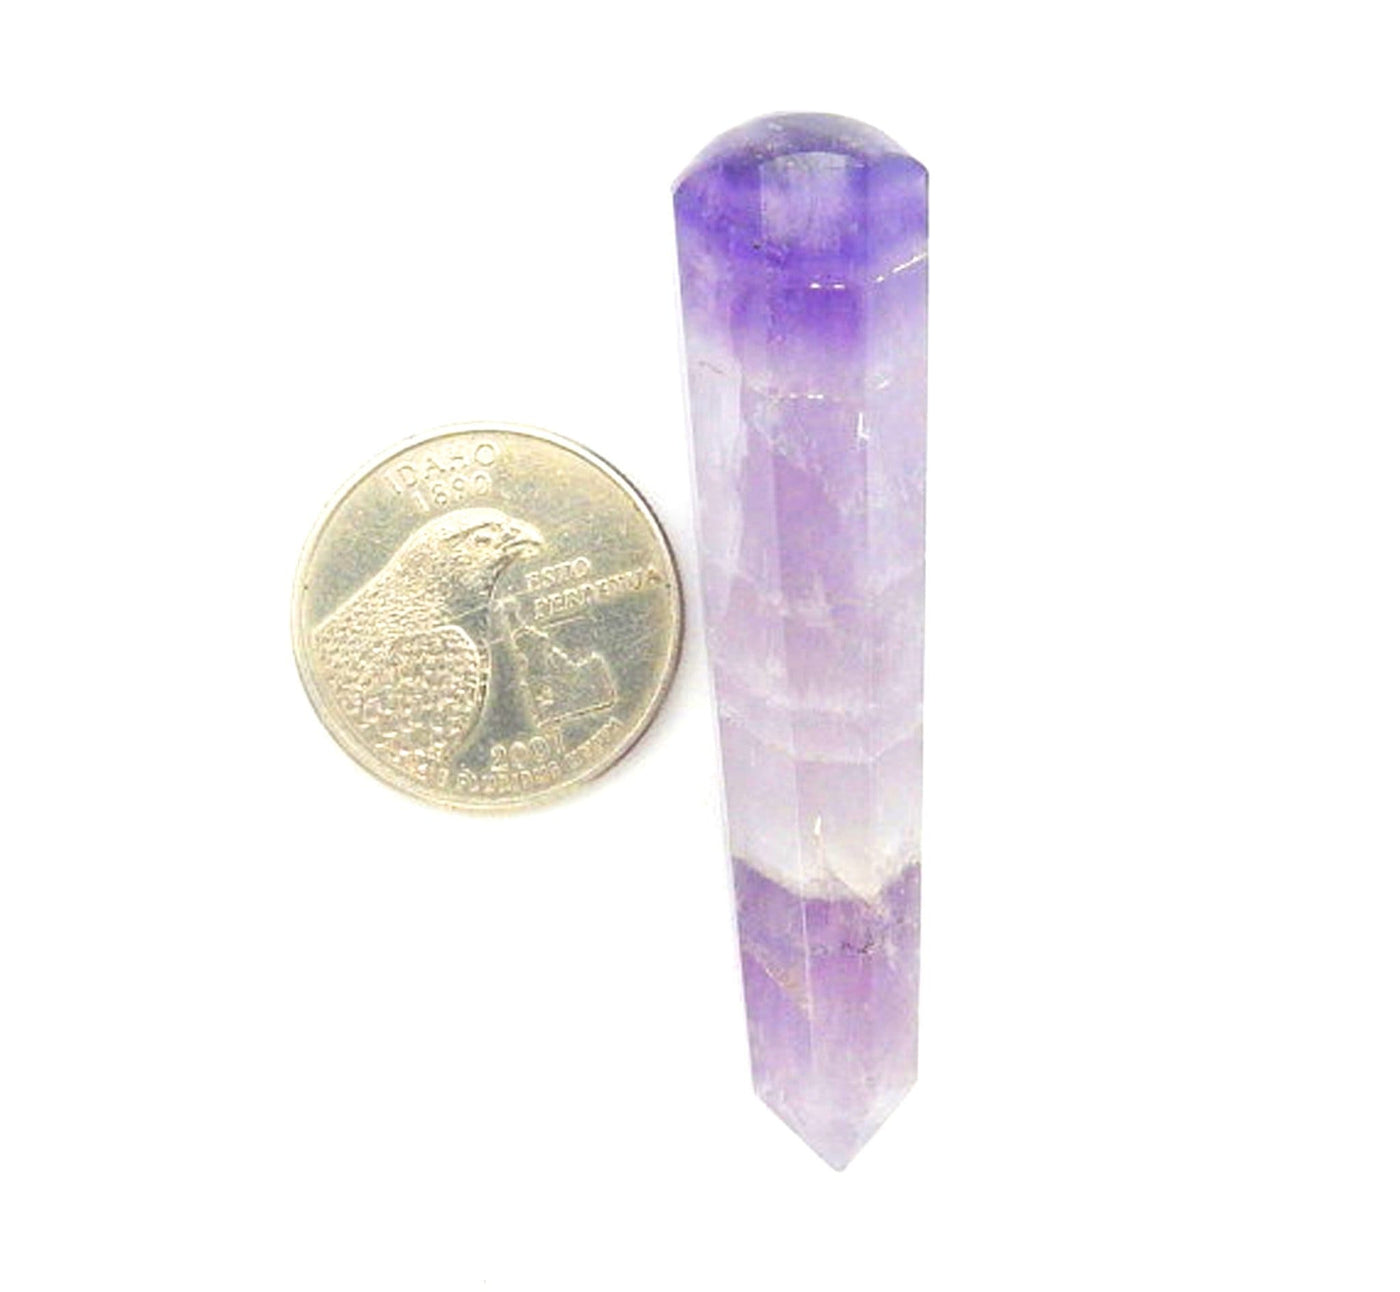 amethyst massage wand next to a quarter for size reference on white background